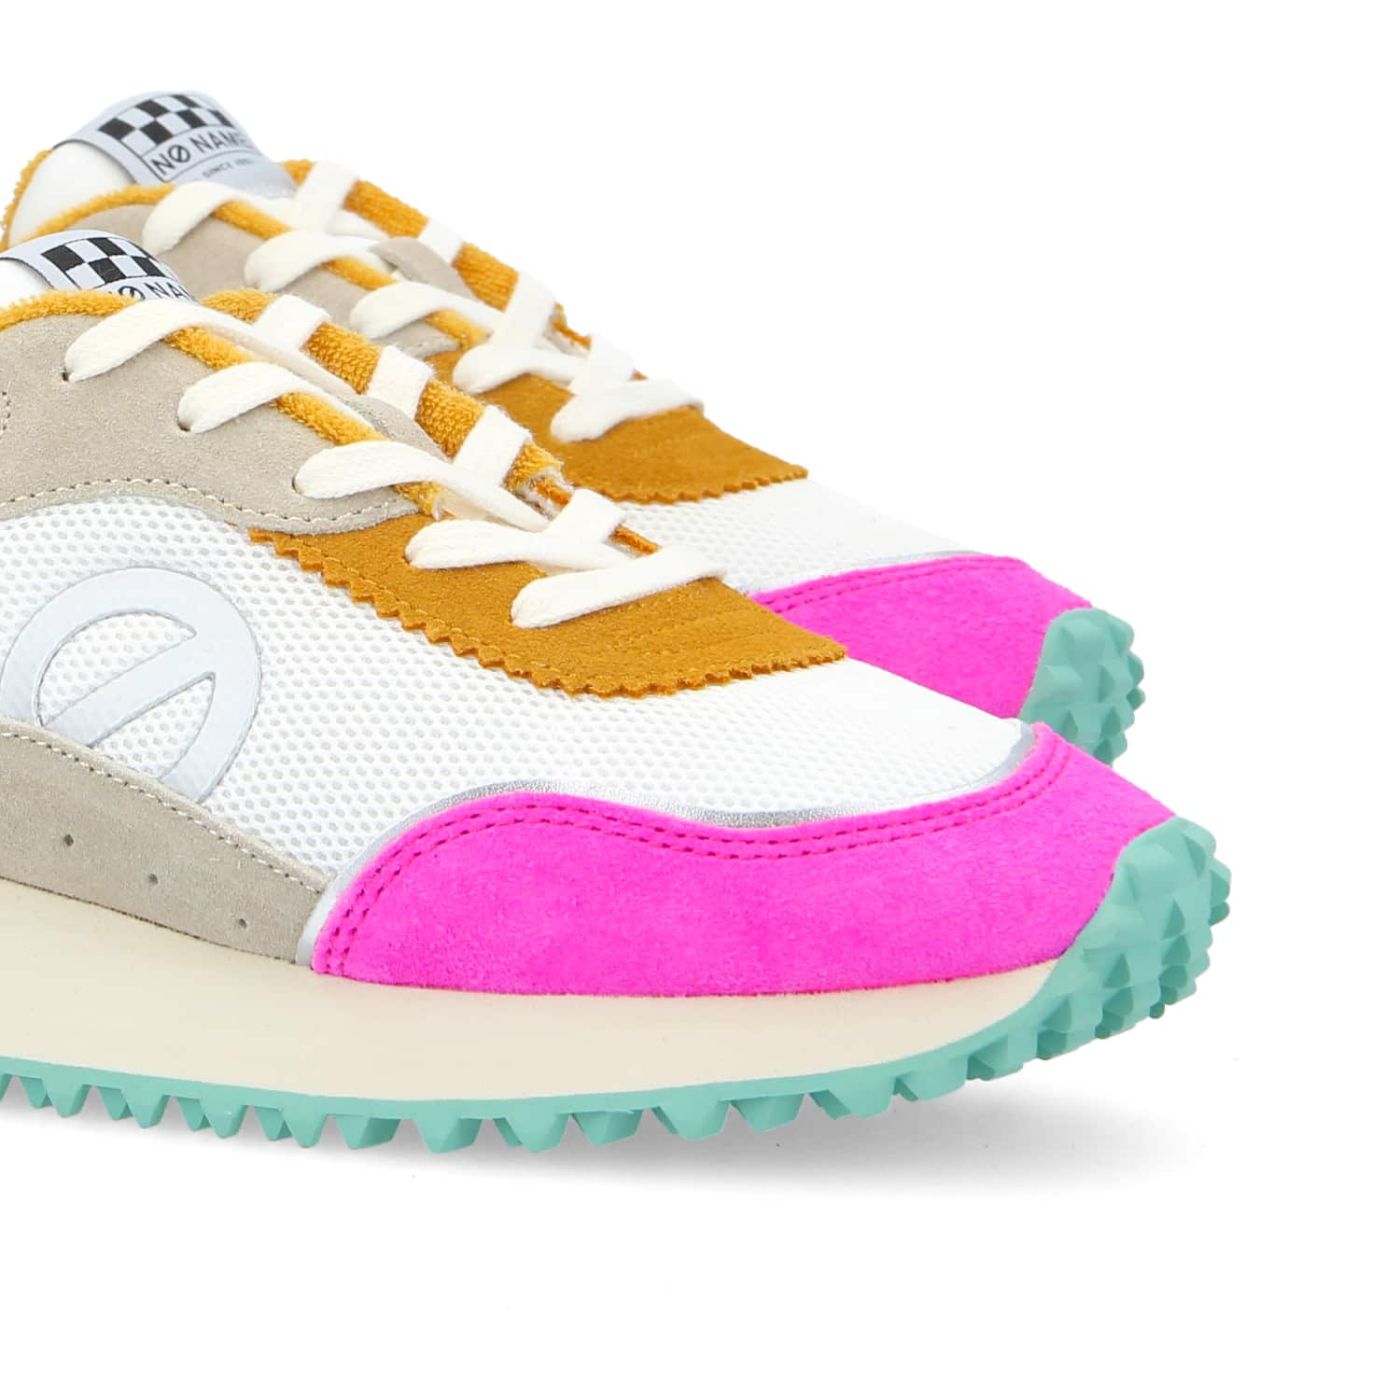 PUNKY JOGGER W - SUEDE/MESH REC. - FLUO FUXIA/WHITE